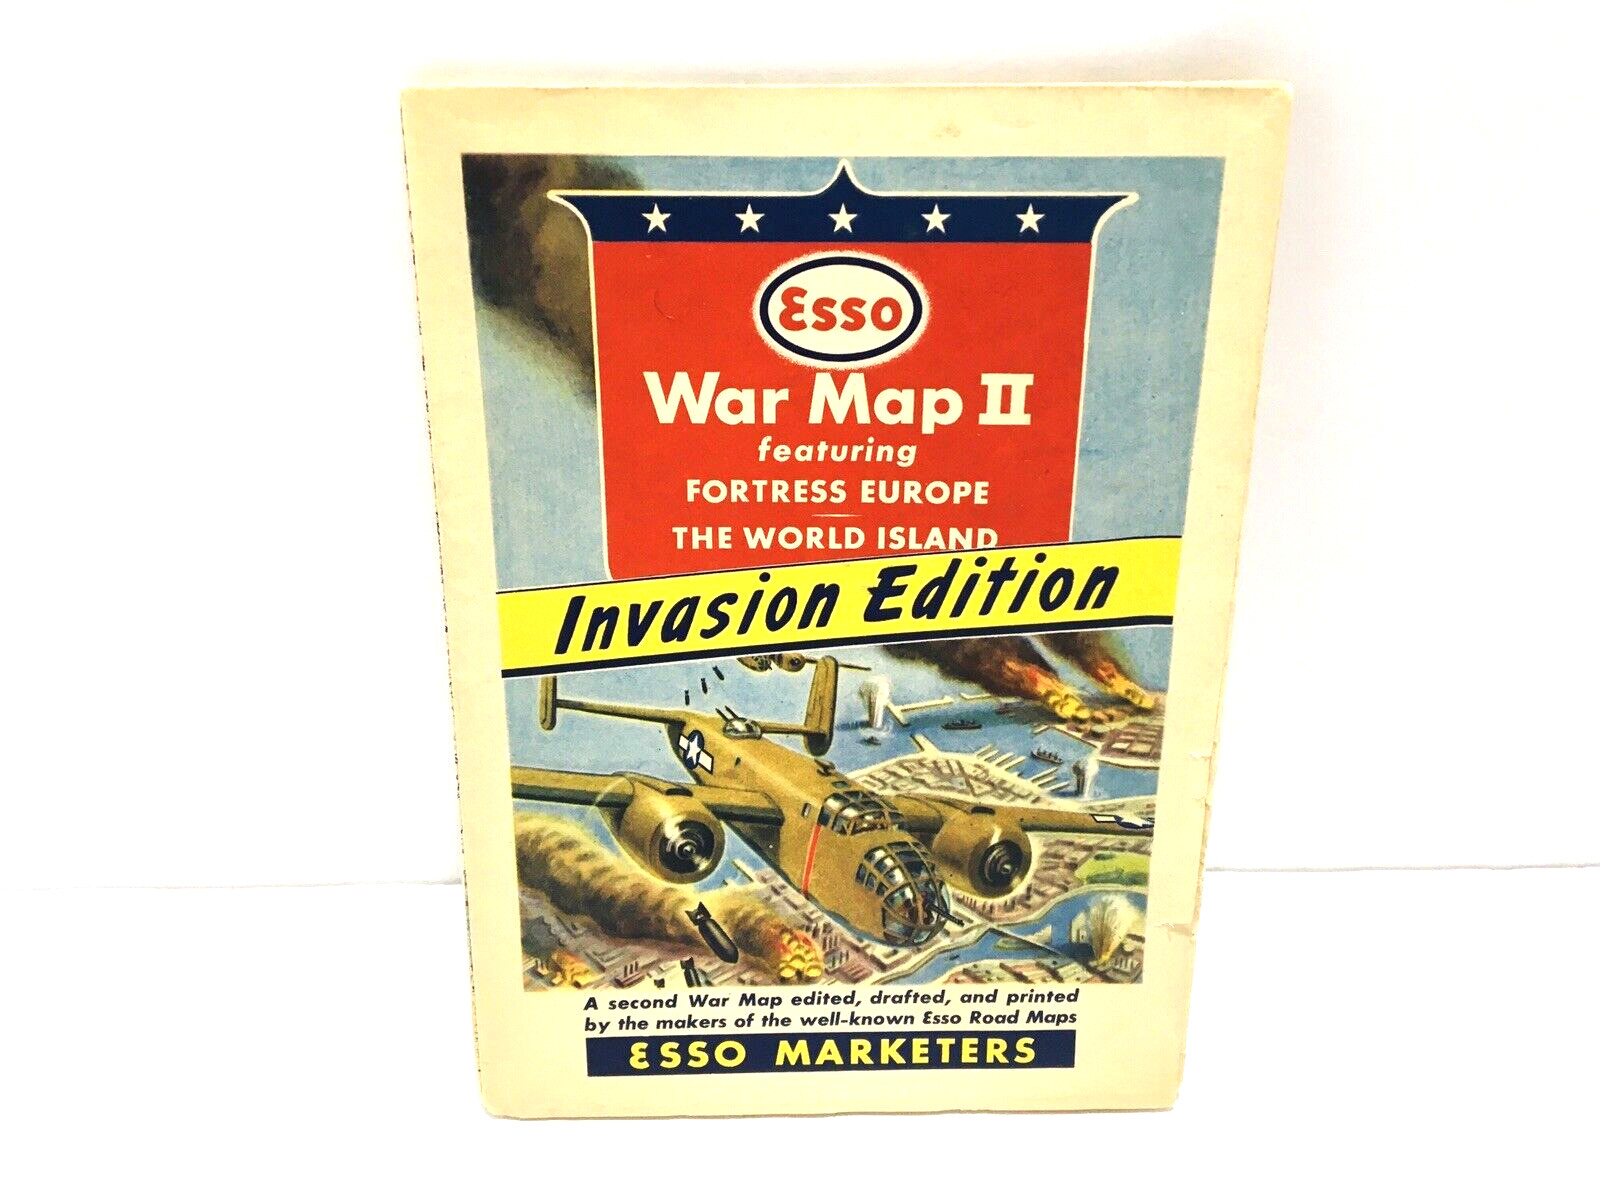 Vtg. 1940s ESSO FOLD-OUT WAR MAP Fortress Europe Oil Island Invasion Edition